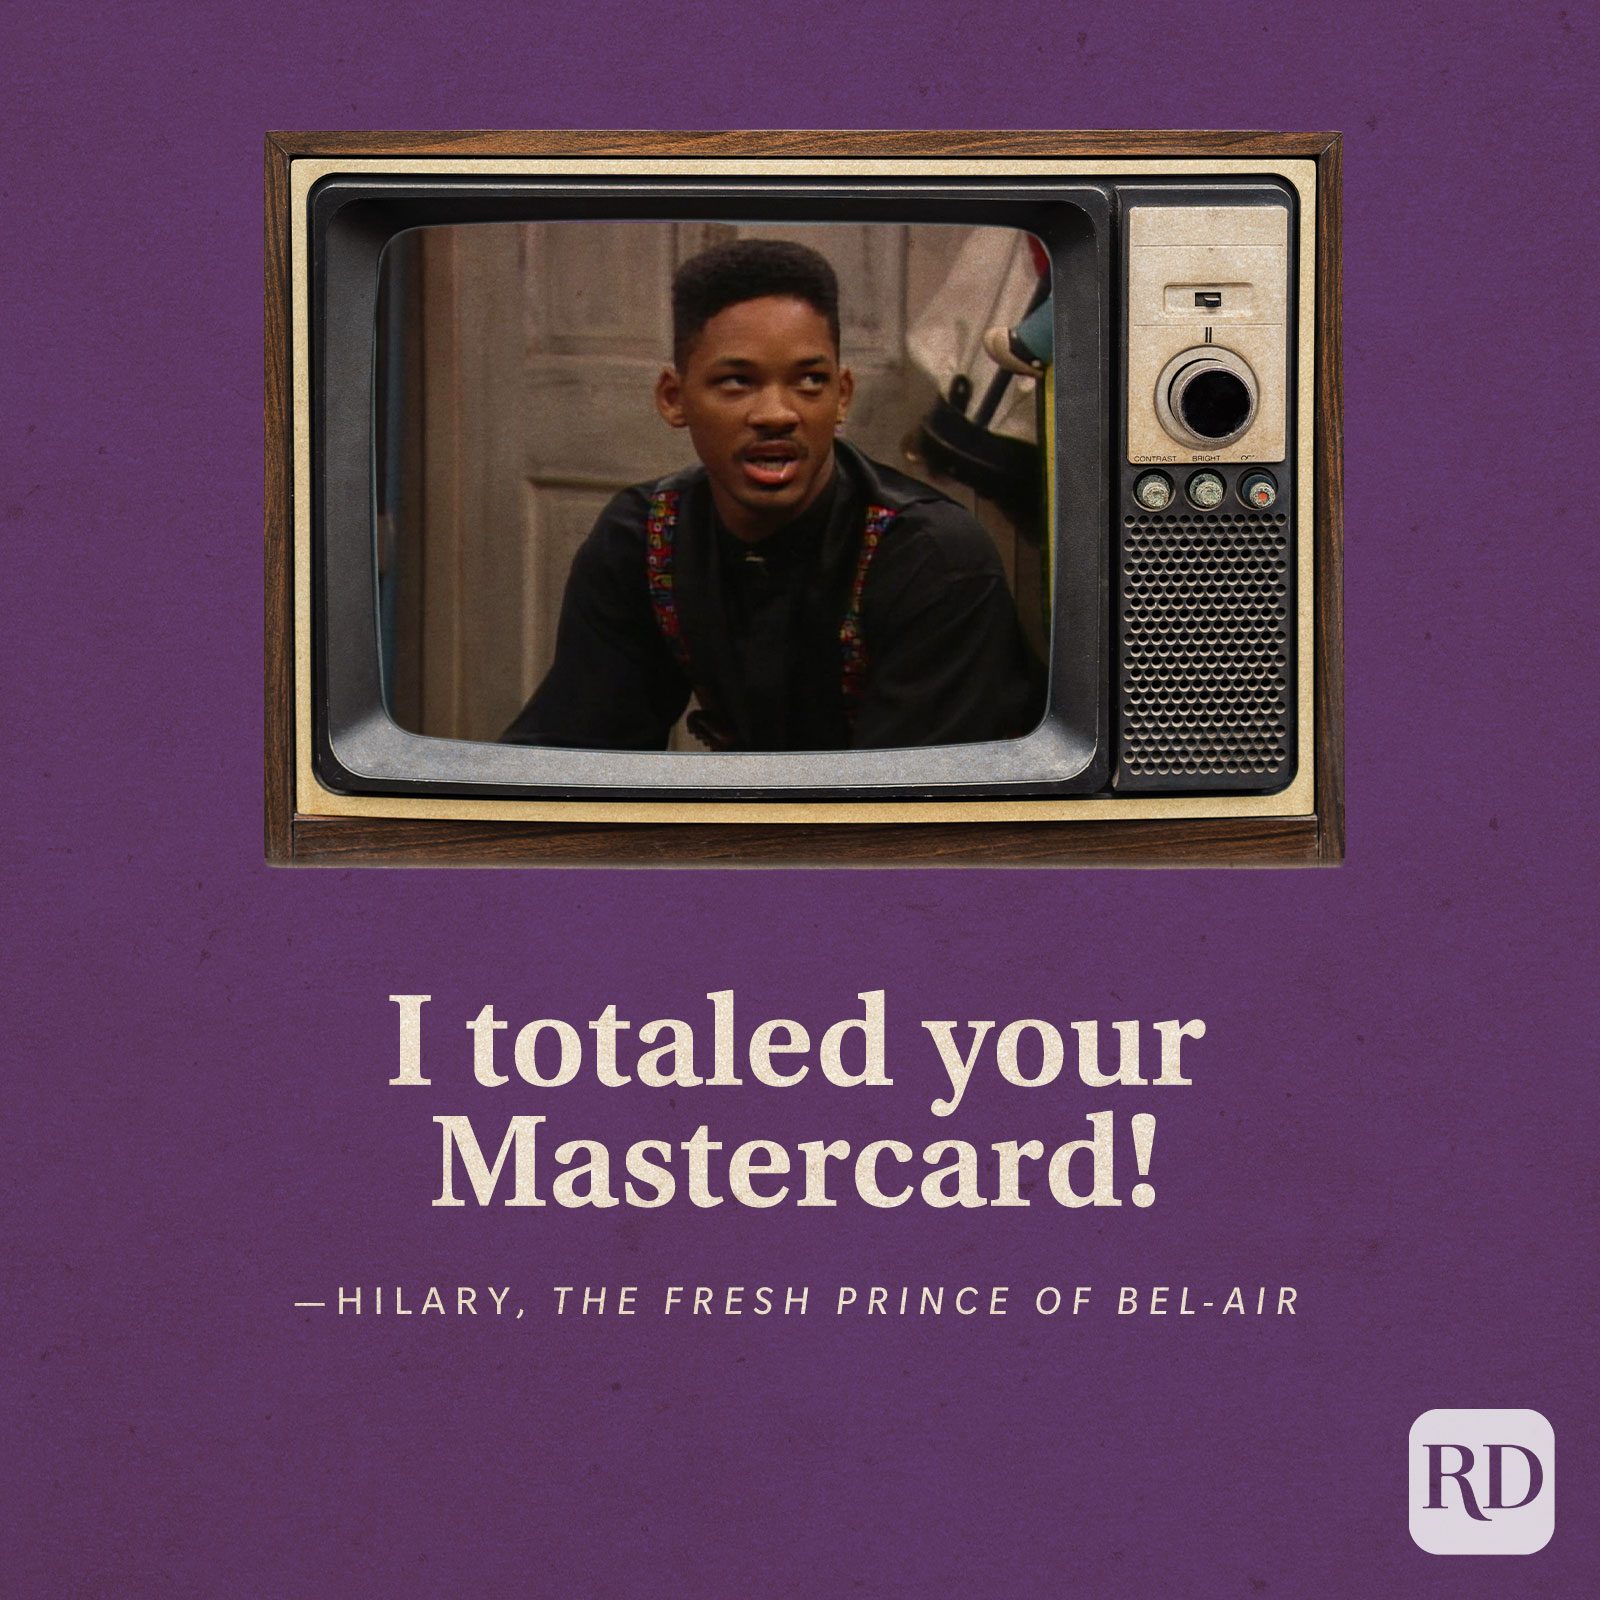  “I totaled your Mastercard!” -Hilary in The Fresh Prince of Bel-Air. 